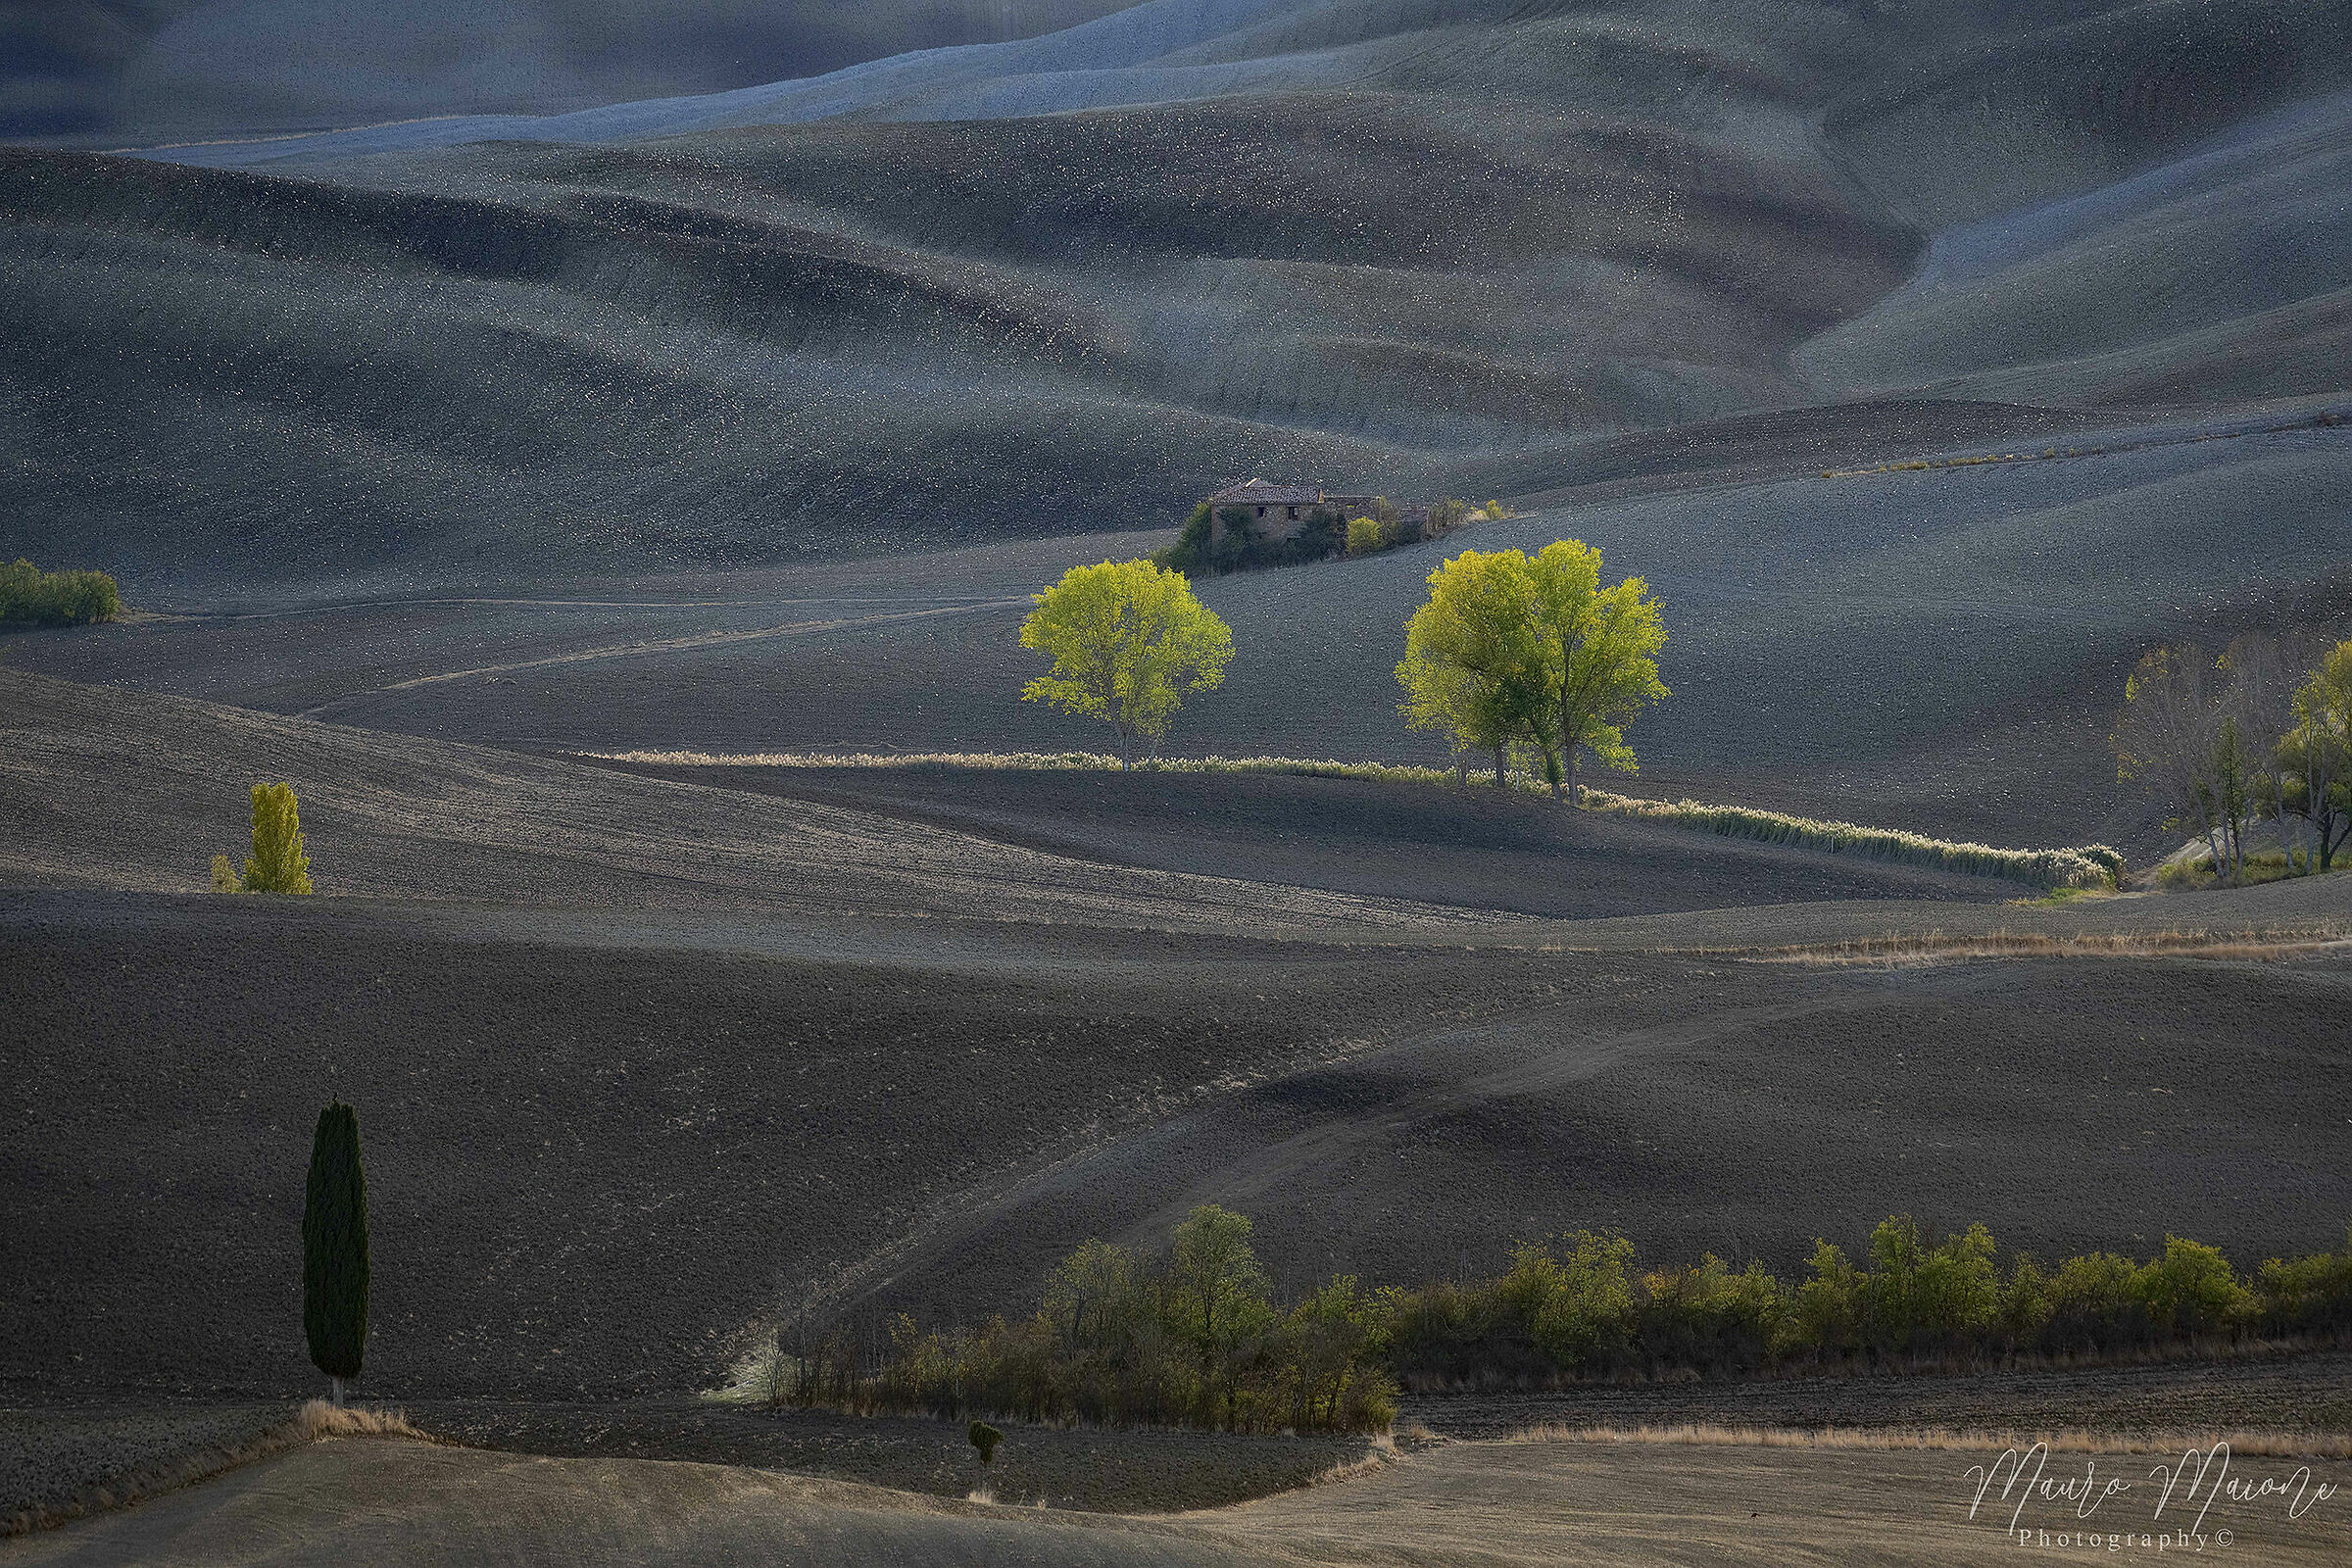 Tuscan ploughed fields...